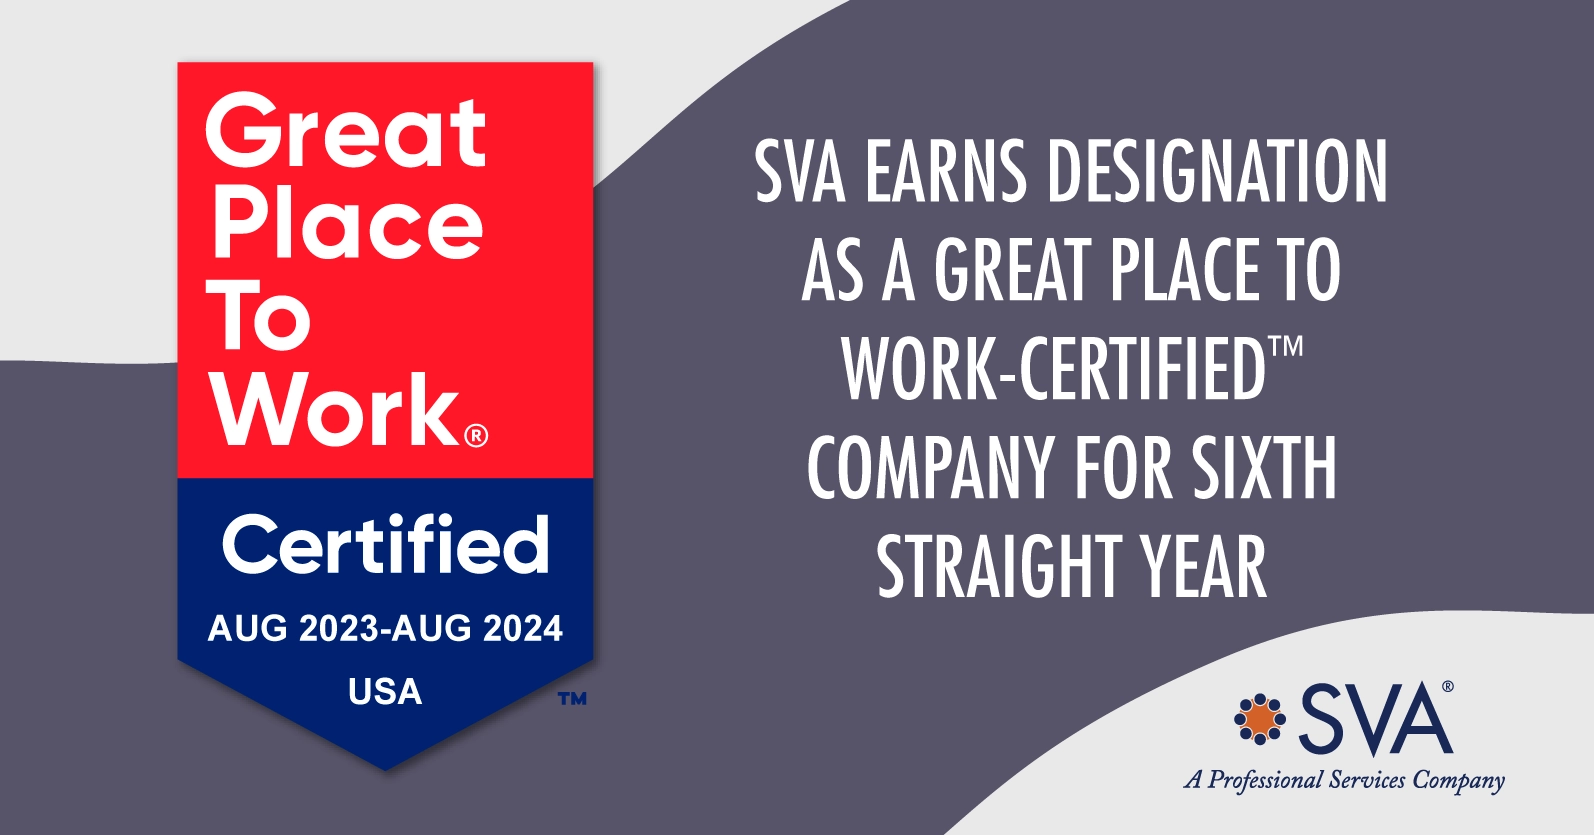 sva-earns-designation-as-a-great-place-to-work-certified-company-for-sixth-straight-year